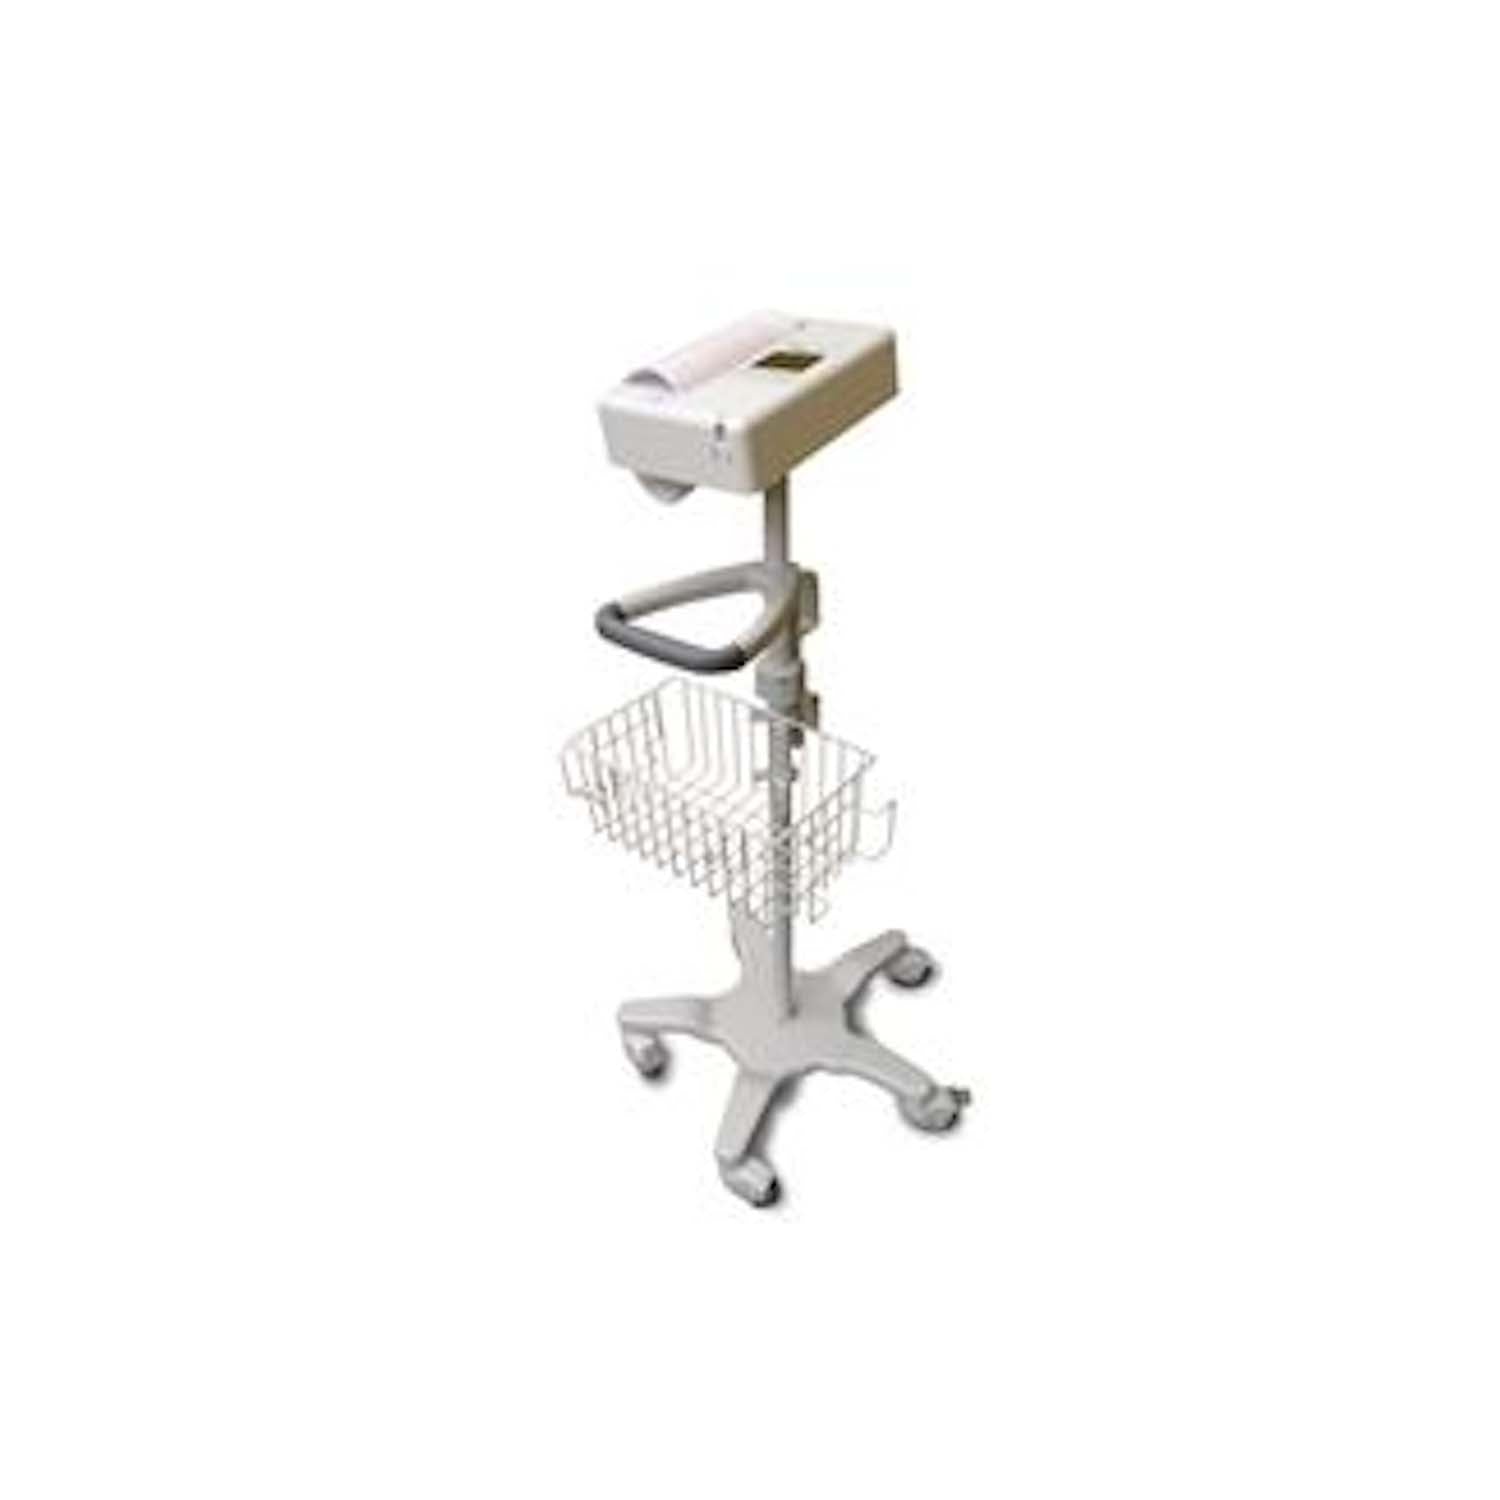 ELI230 Rolling Stand with wire basket